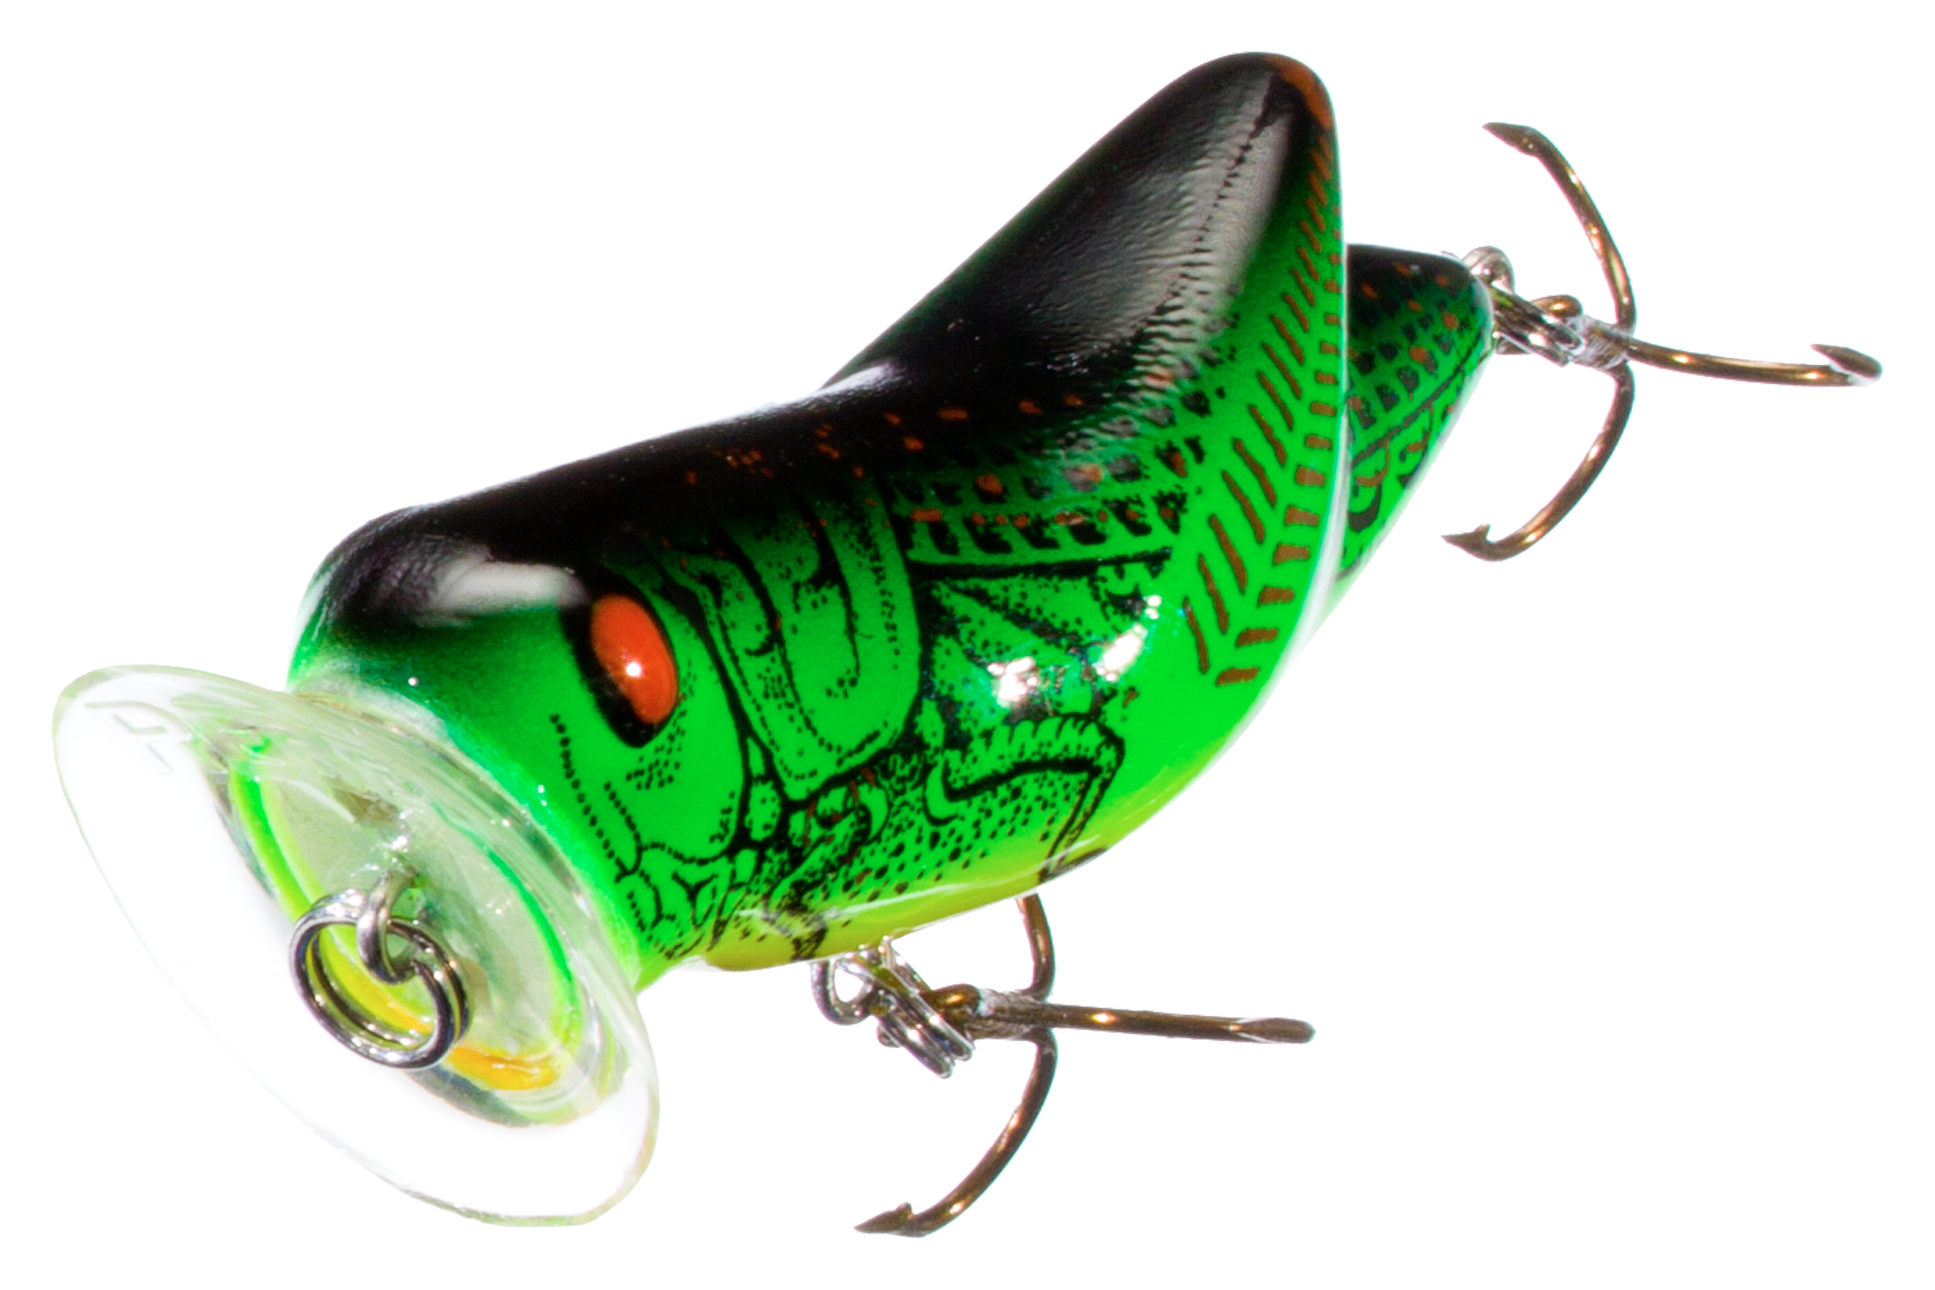 Rebel Lures Jumpin' Minnow Topwater Fishing Lure, Topwater Lures -   Canada